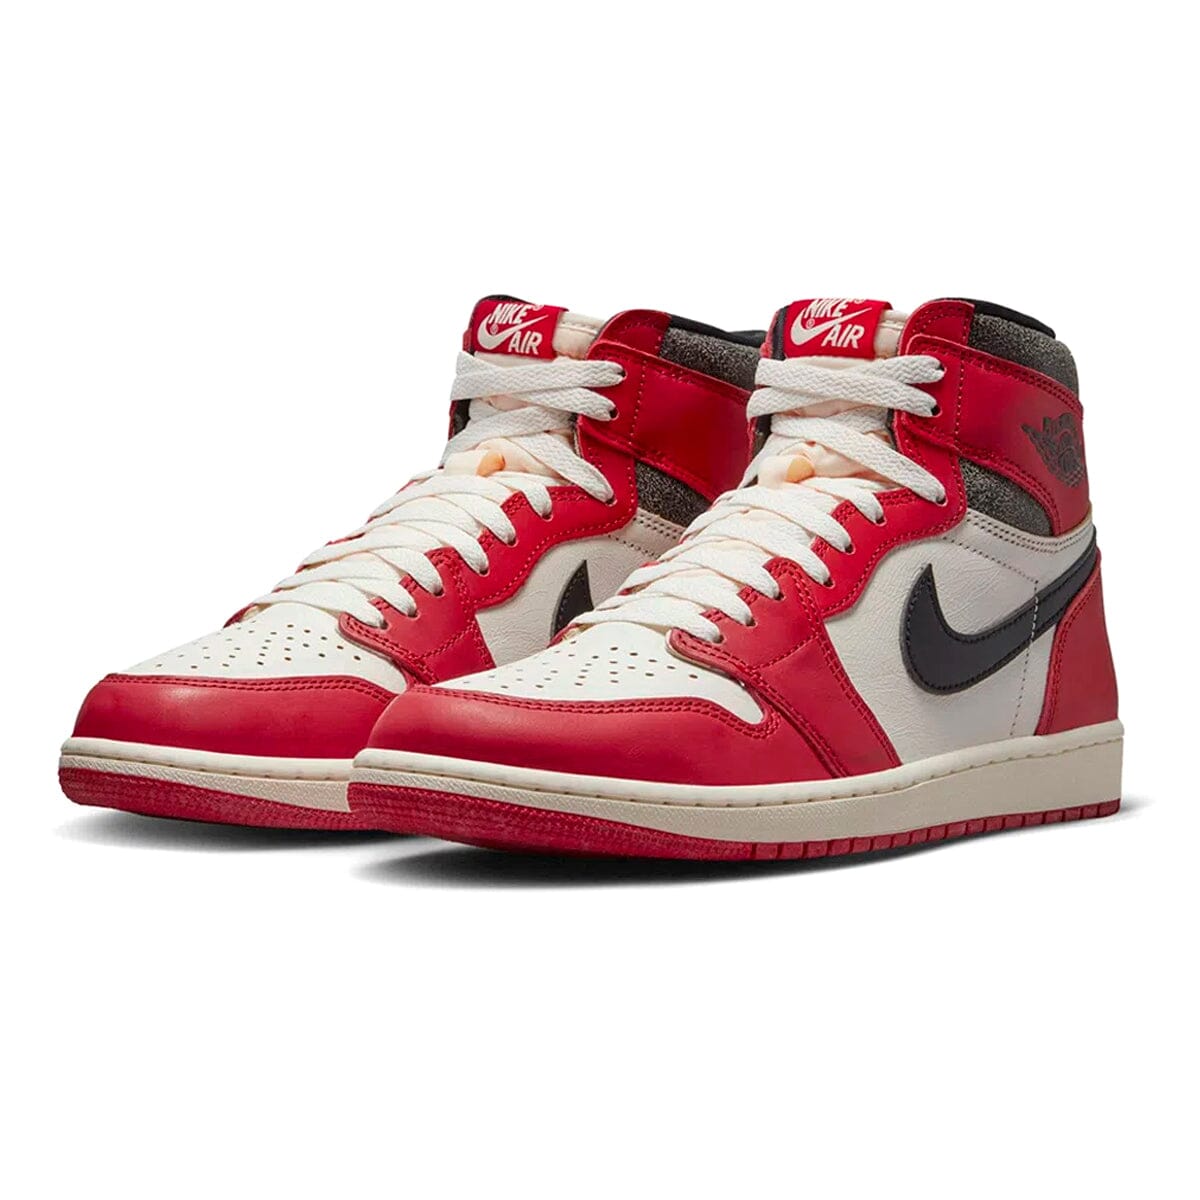 Air Jordan 1 Retro High OG Chicago Lost and Found Blizz Sneakers 